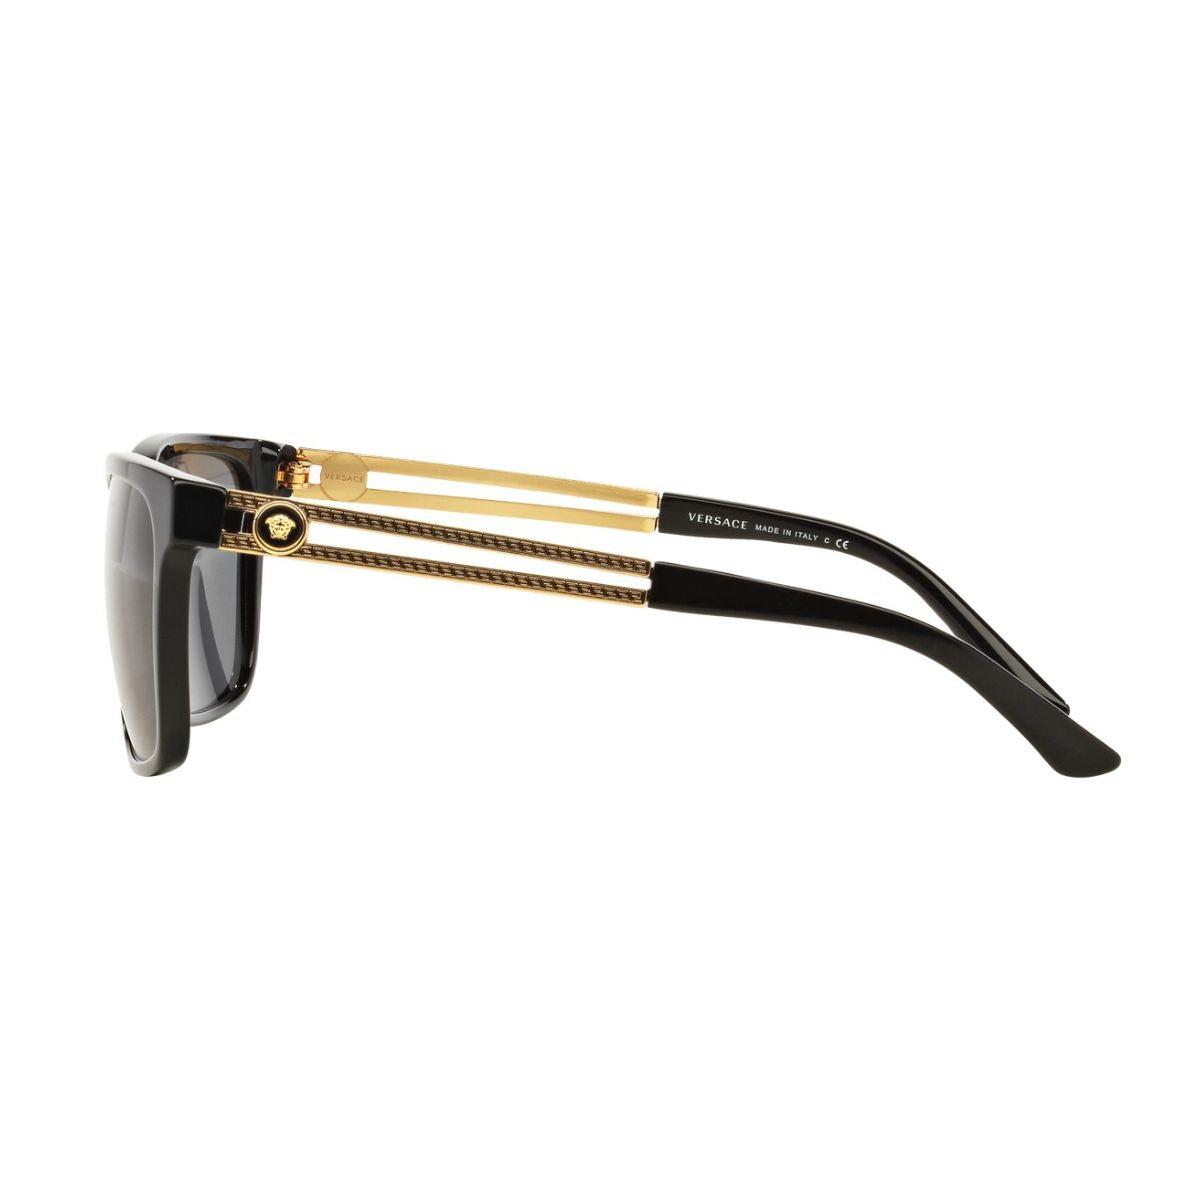 "Stylish black and gold Versace 4307 GB1/87 sunglasses for men and women at Optorium. Shop now for the perfect accessory!"